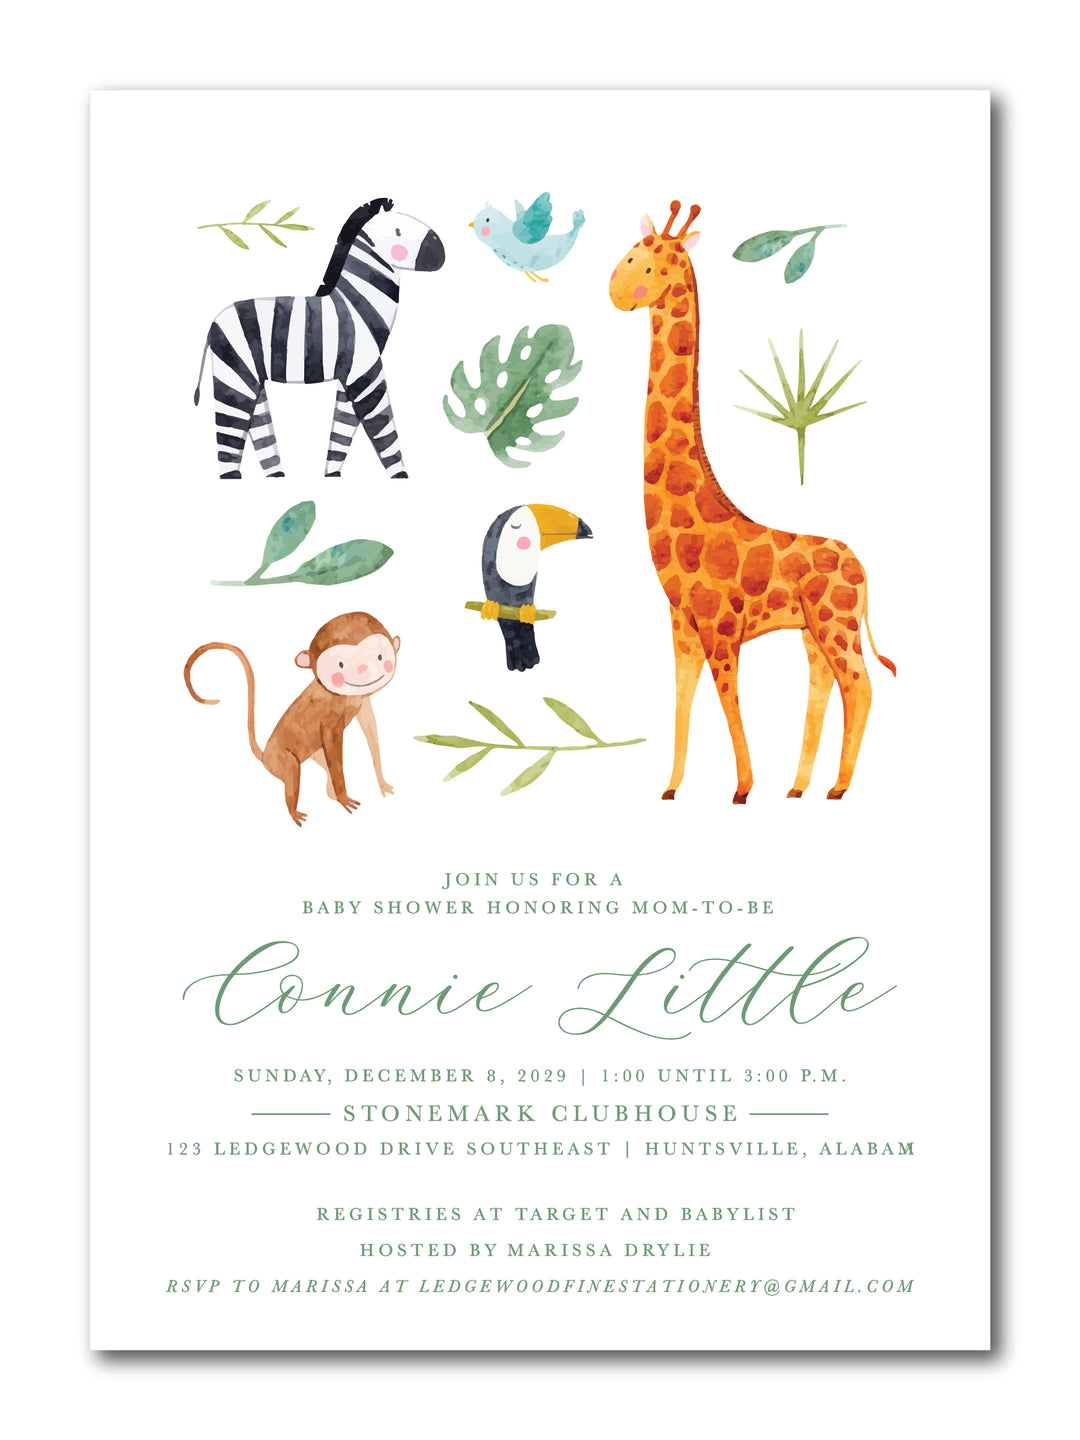 The Connie Baby Shower Invitation